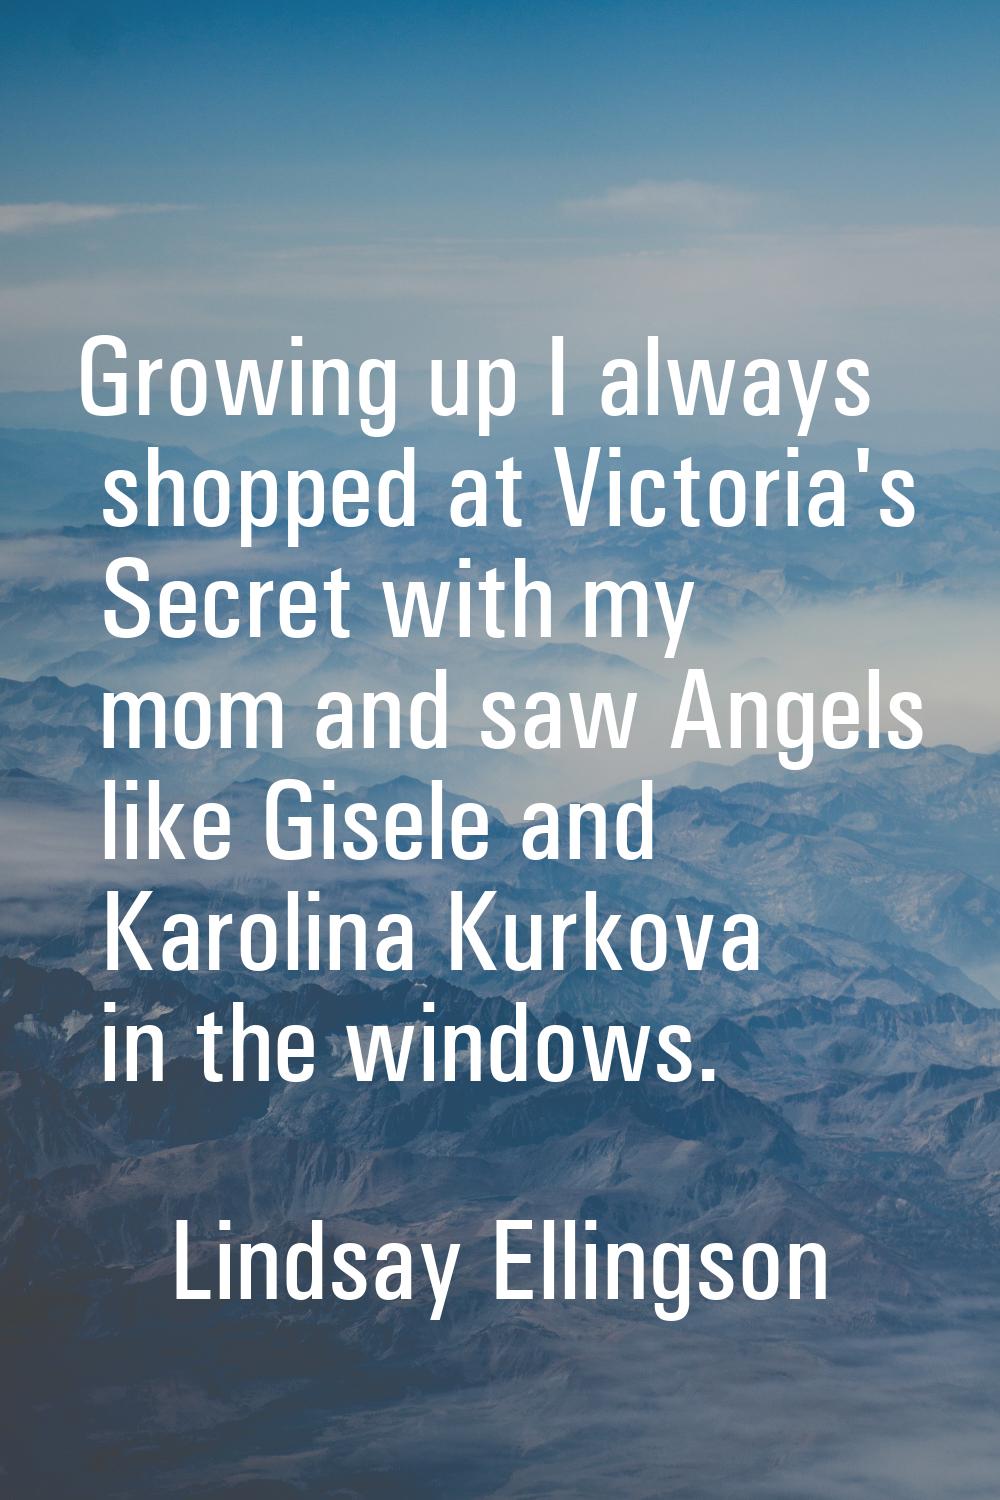 Growing up I always shopped at Victoria's Secret with my mom and saw Angels like Gisele and Karolin